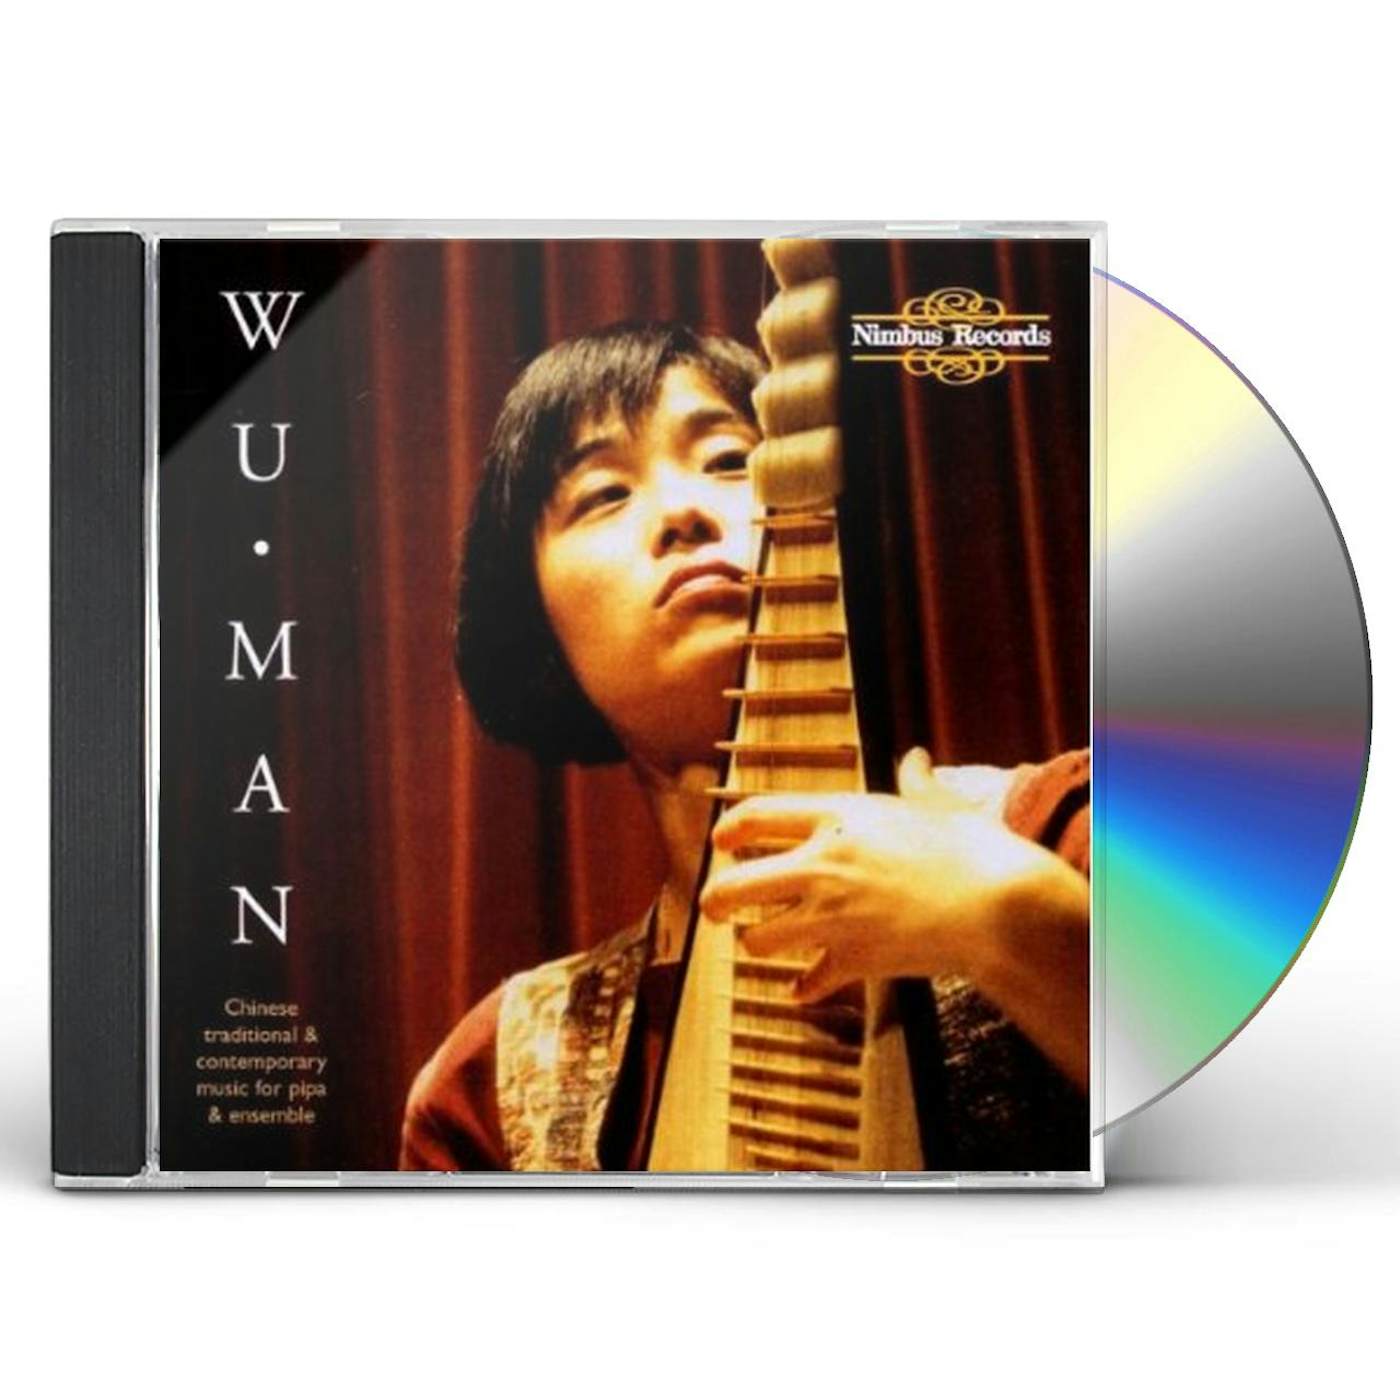 Wu Man MUSIC FOR CHINESE PIPA & TRADITIONAL CONTEMPORARY CD